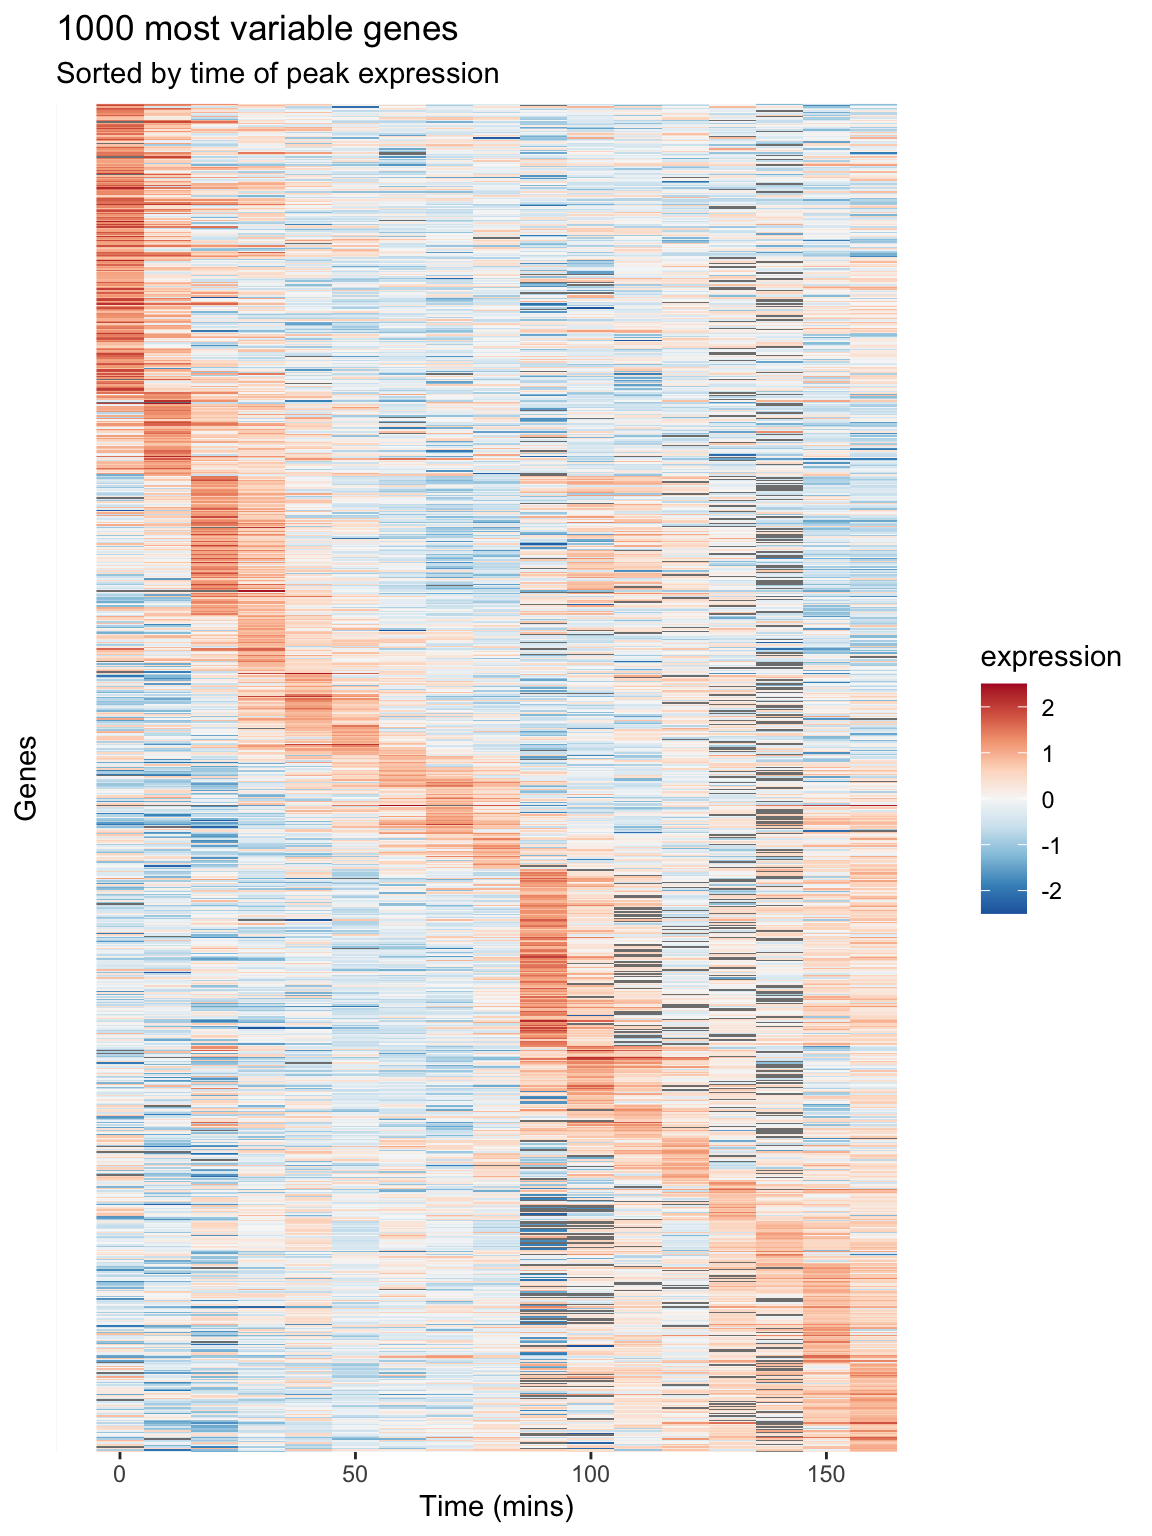 A Heatmap showing genes in the cdc28 experiment, sorted by peak expression